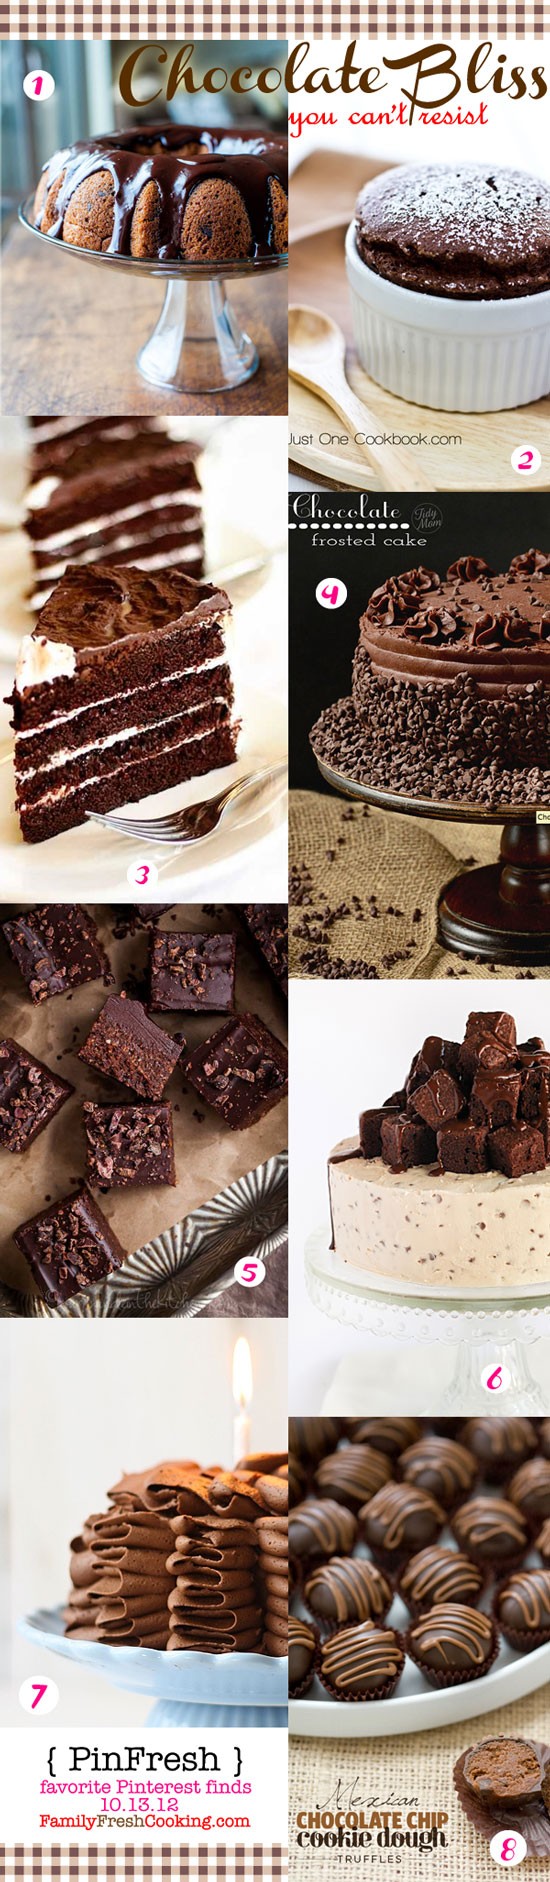 Chocolate Bliss from Pinterest